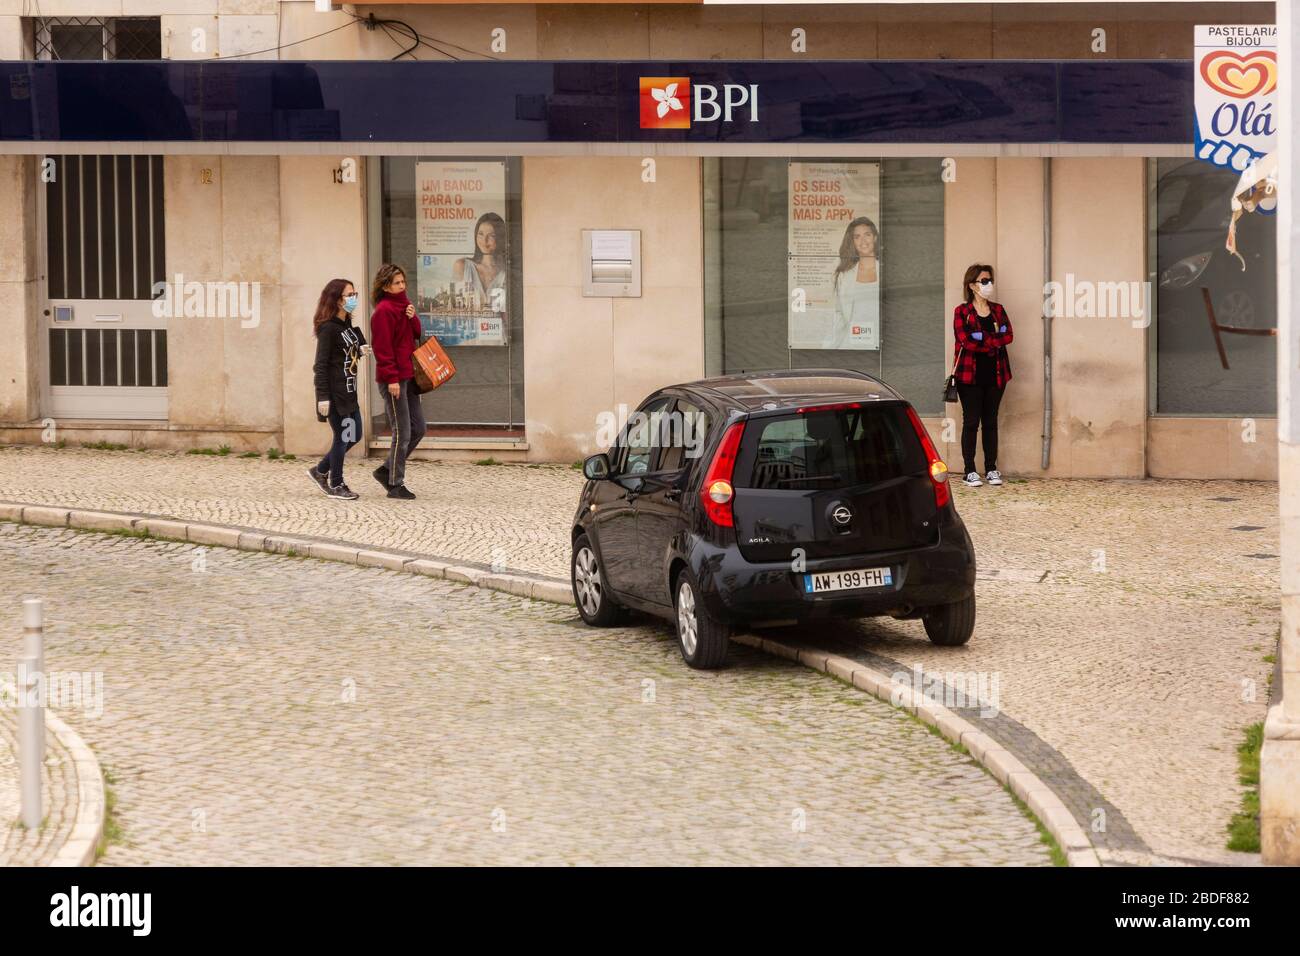 Olhão, Portugal, 8th April, 2020. Few people circulate on the streets of Olhão, as a result of the state of emergency decreed by the government. Stock Photo